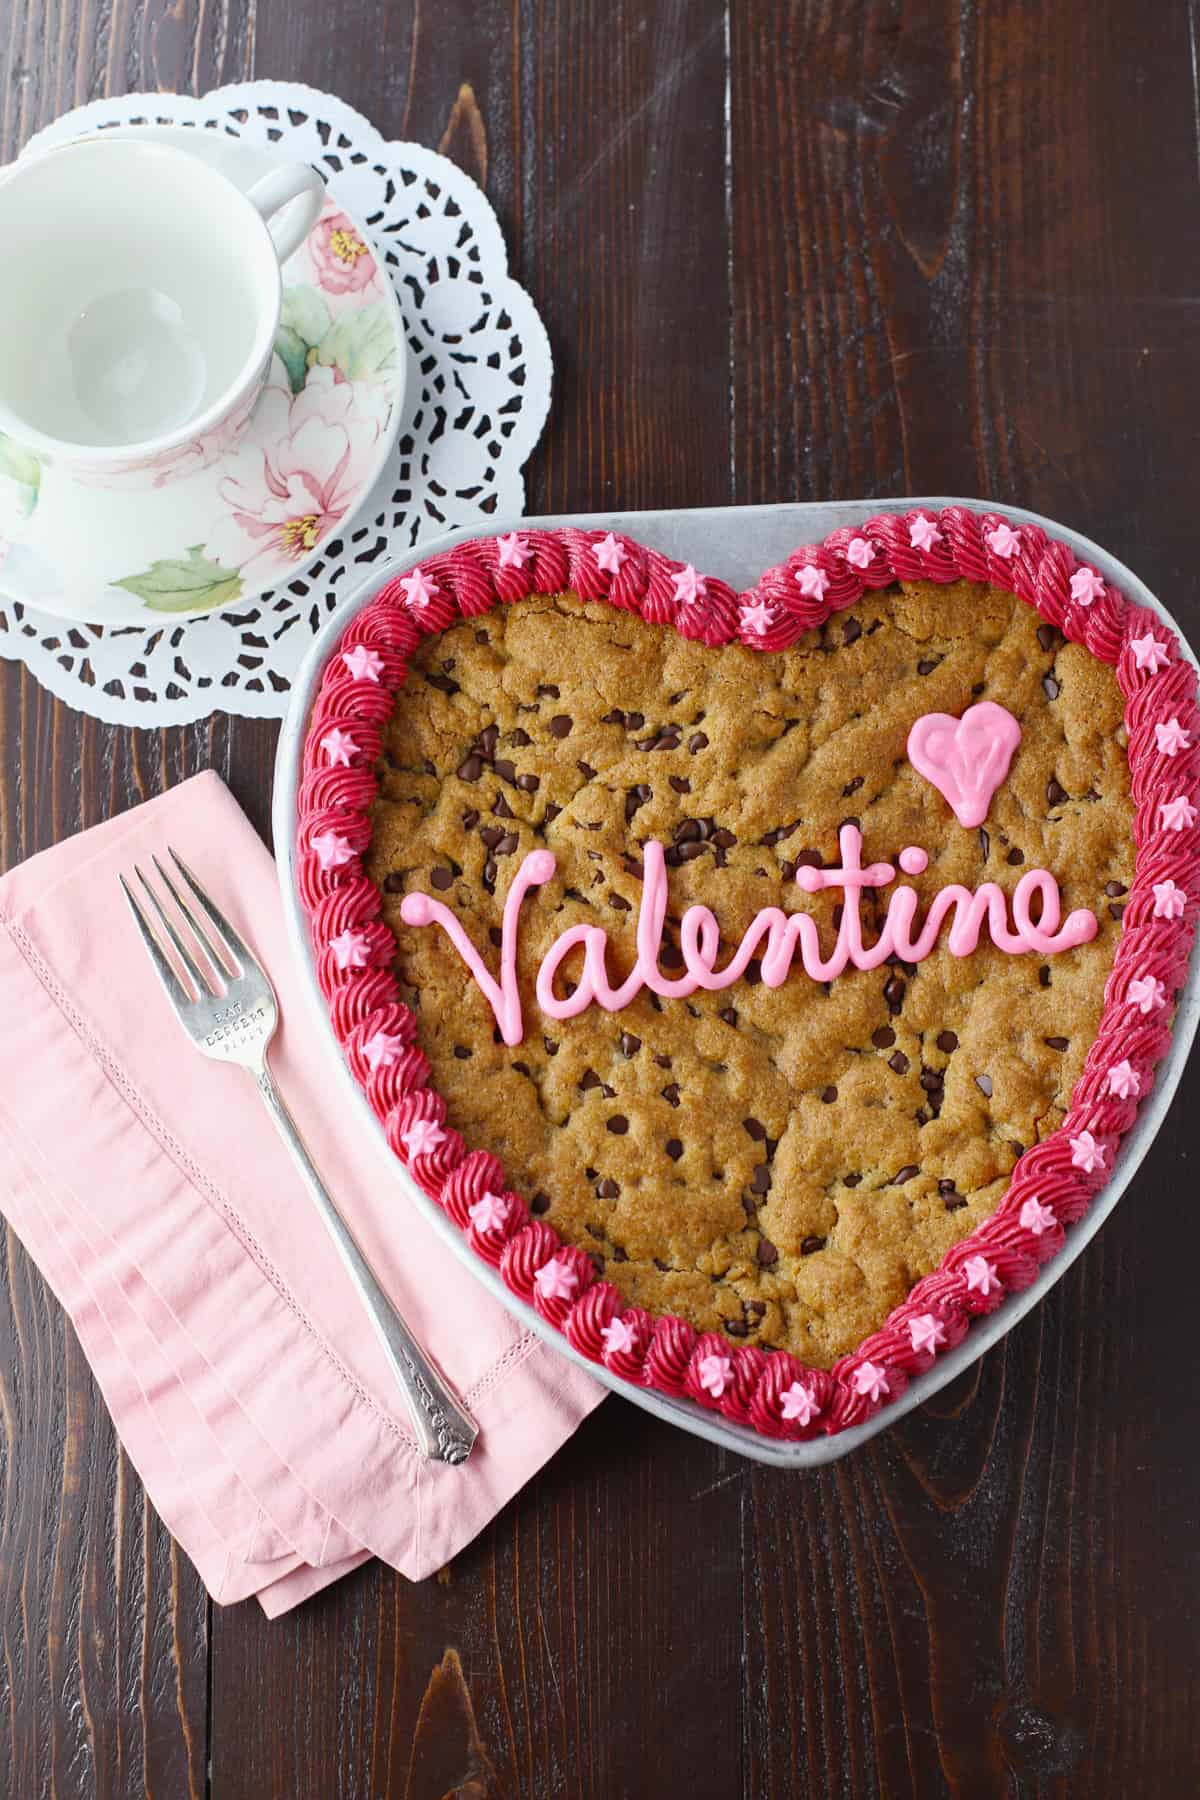 Heart cookie cake on table with pink napkn and fork.